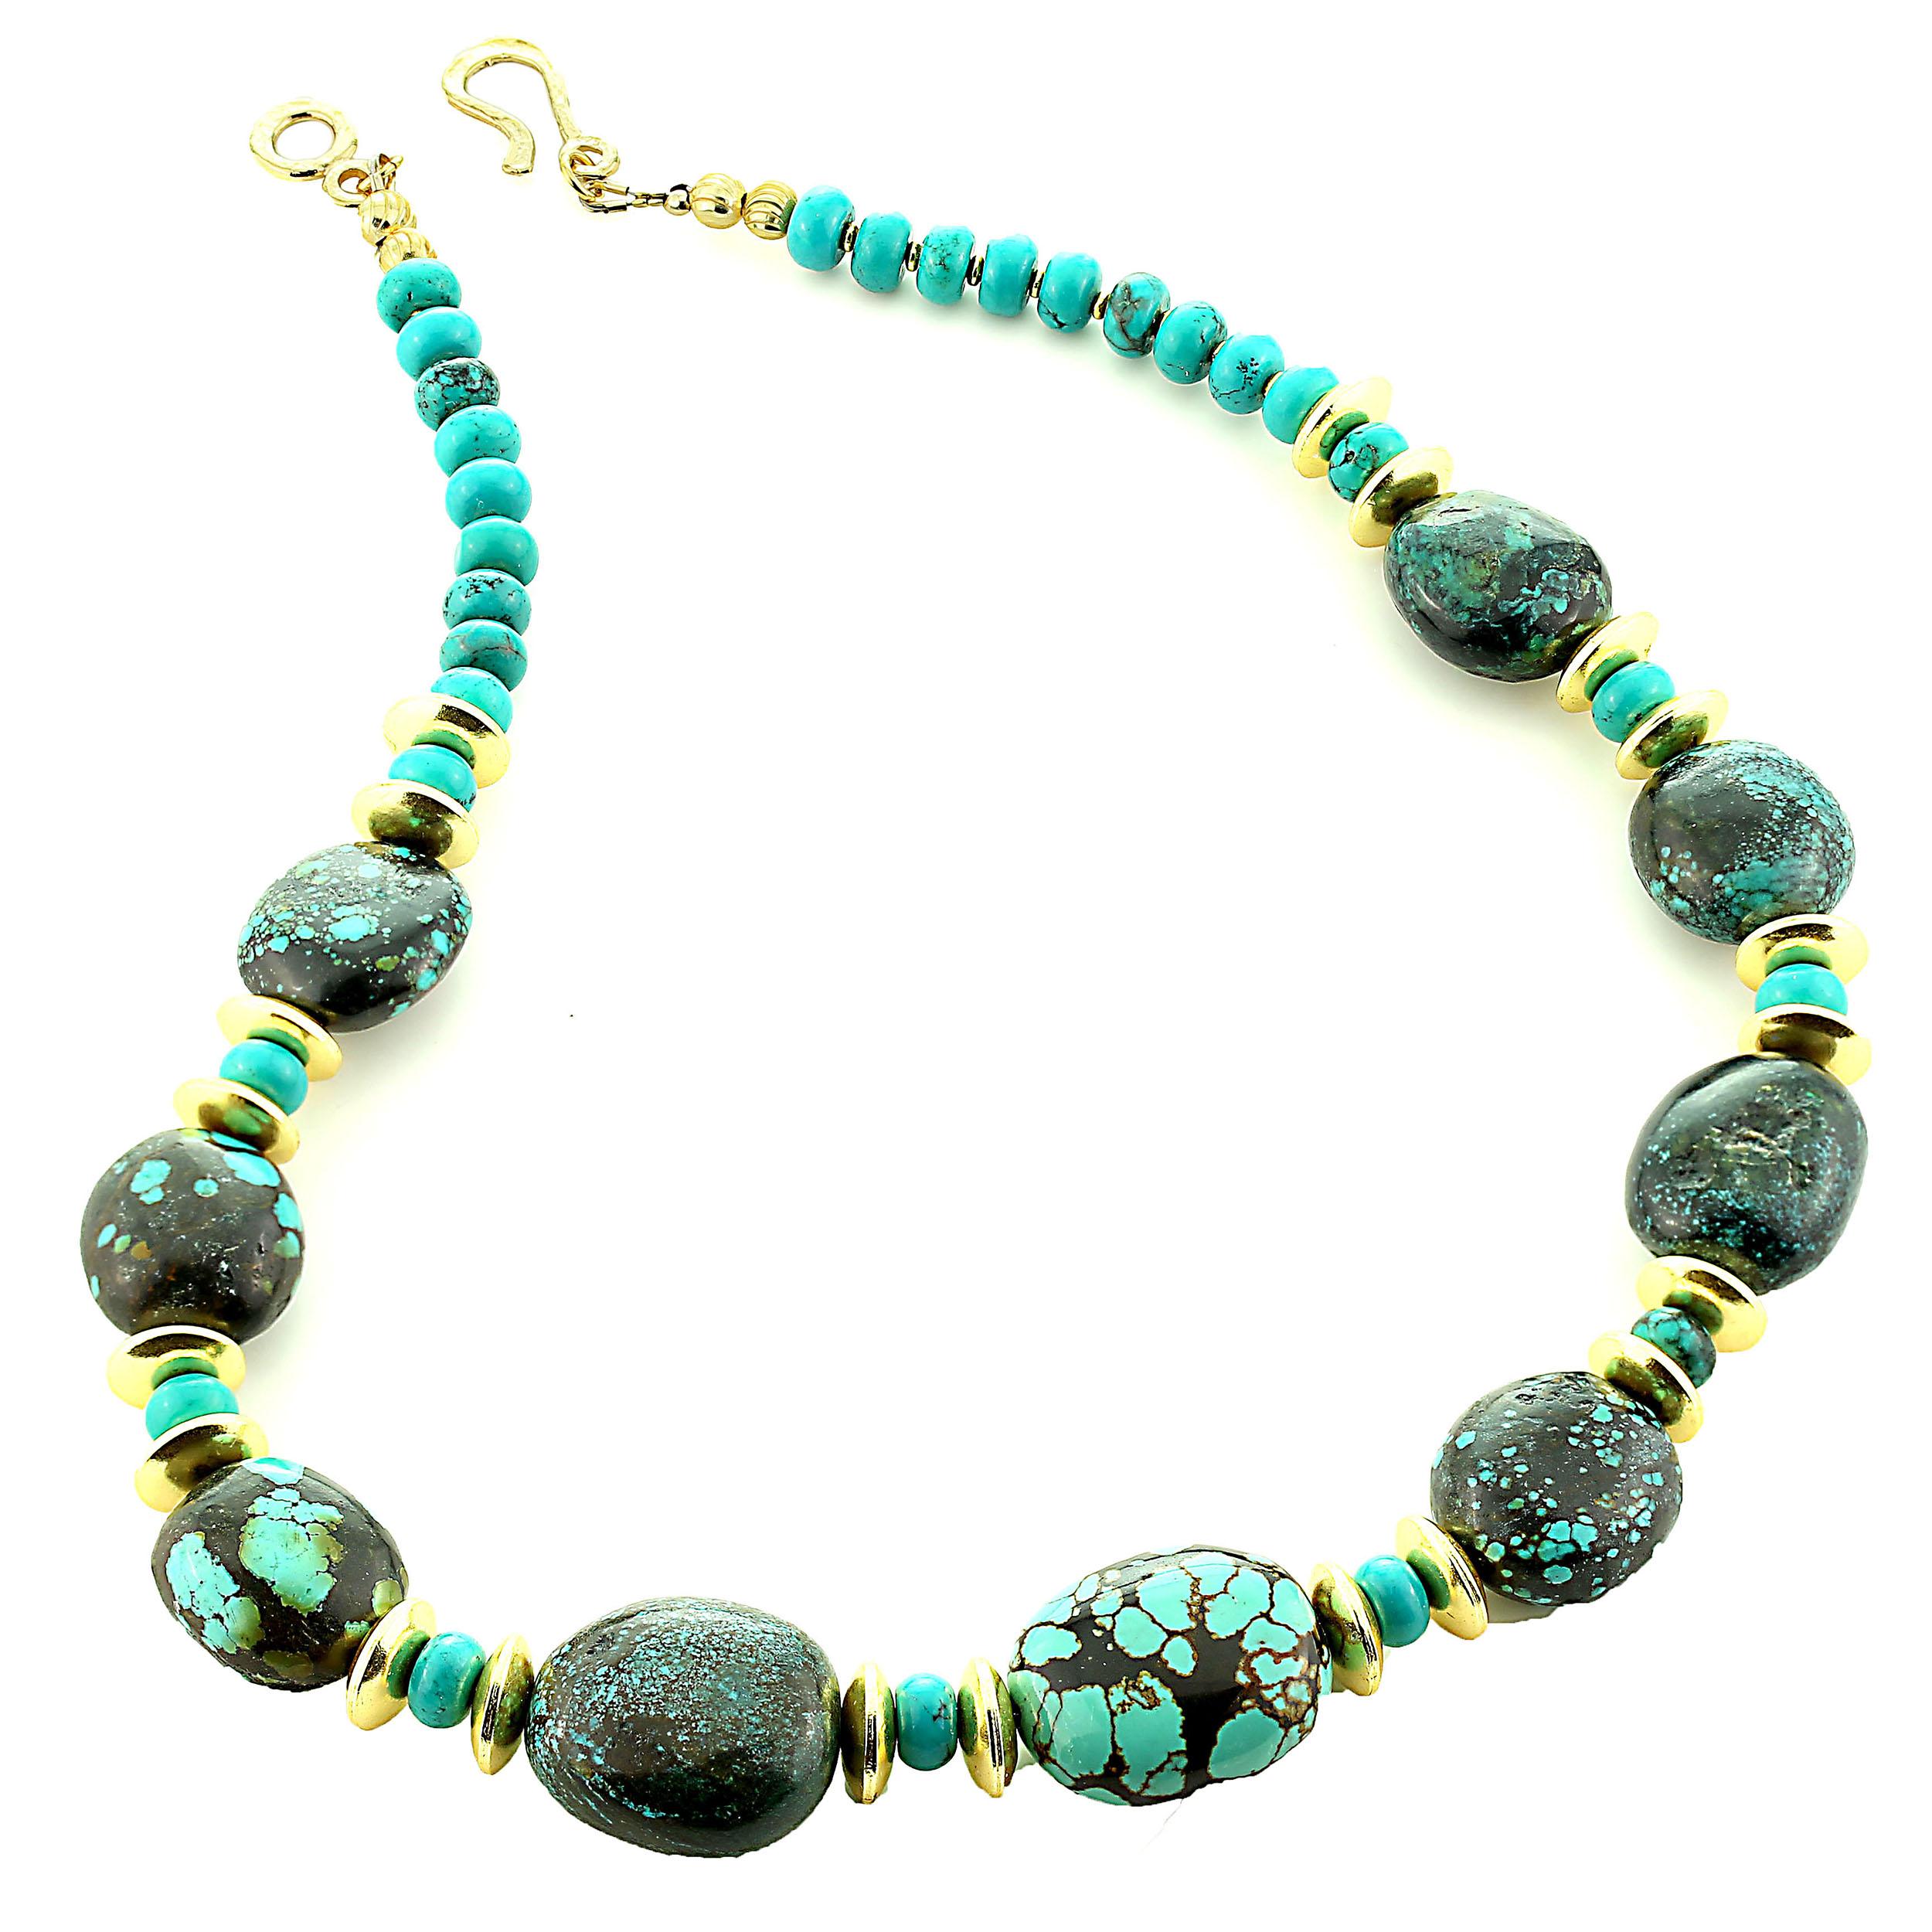 AJD Stunning Hubei Turquoise Necklace with Gold Accents